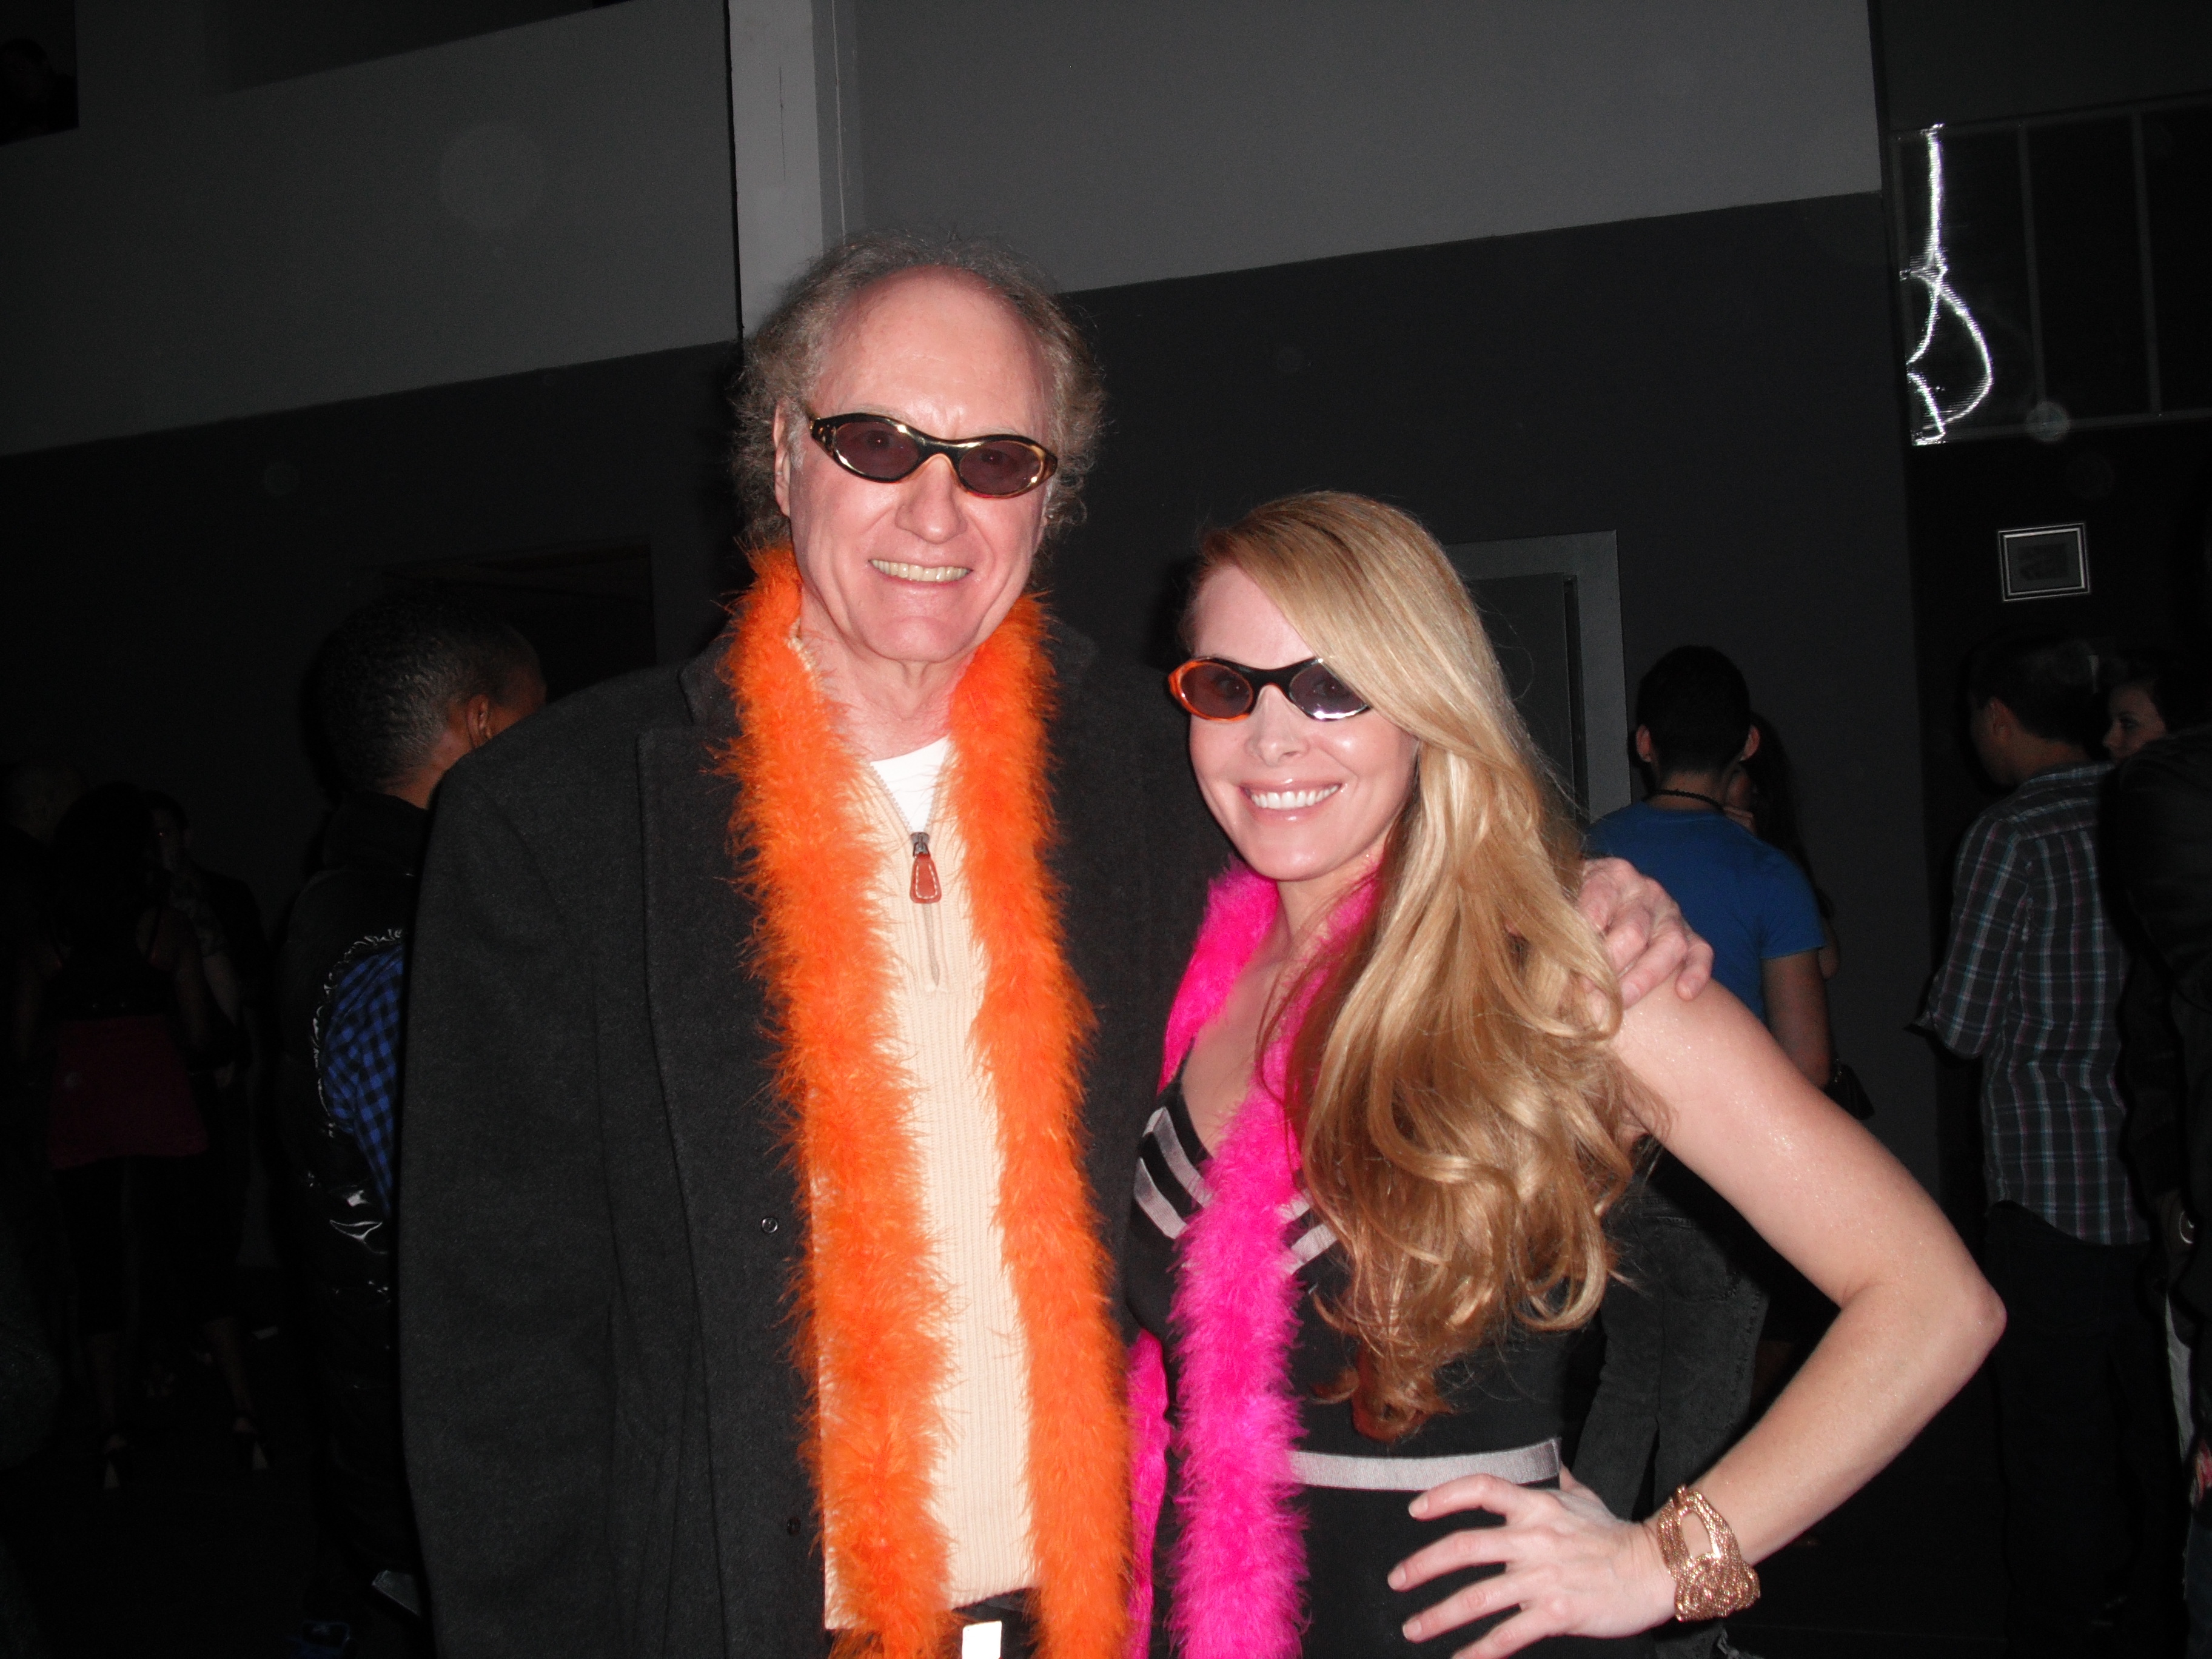 With Tami (Pippi Longstocking) Erin at pre-Grammy party